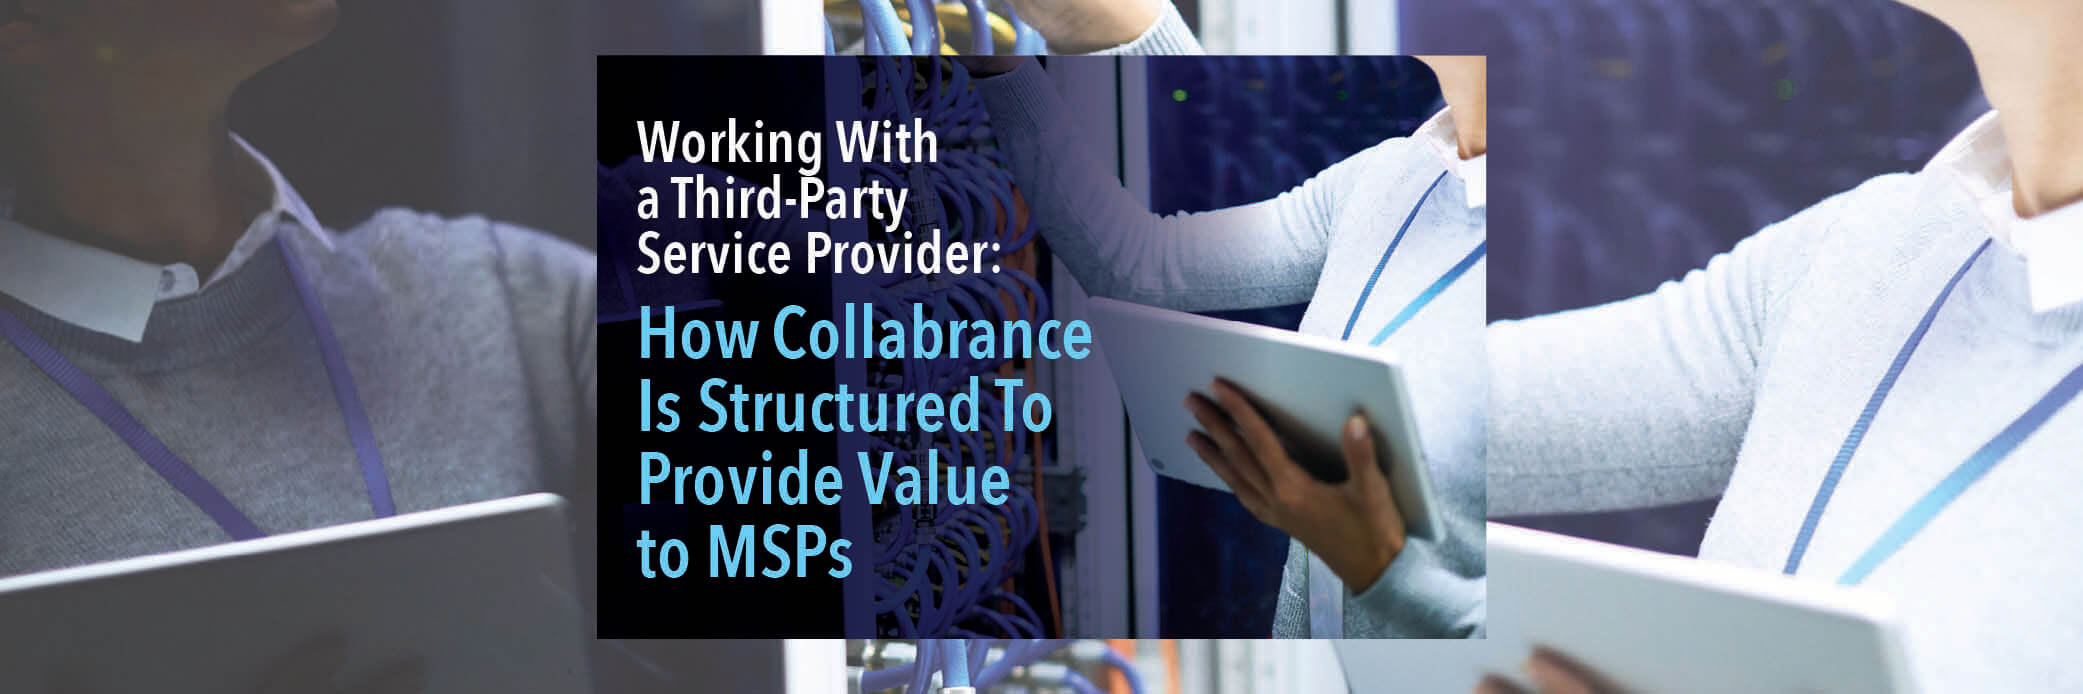 Working With a Third-Party Service Provider: How Collabrance Is Structured To Provide Value to MSPs.